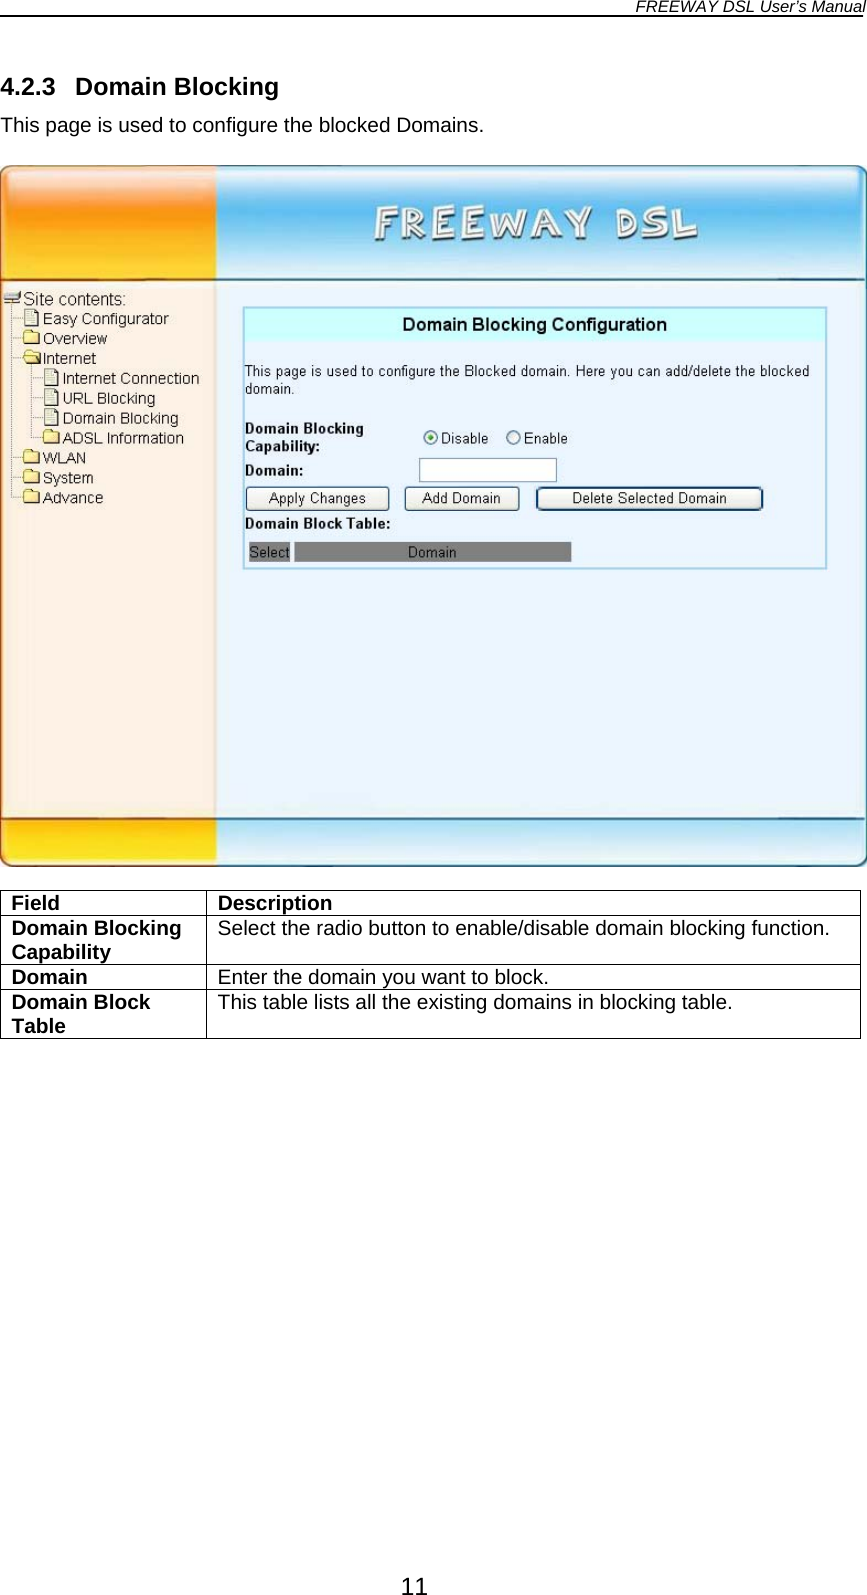 FREEWAY DSL User’s Manual  4.2.3 Domain Blocking This page is used to configure the blocked Domains.    Field Description Domain Blocking Capability  Select the radio button to enable/disable domain blocking function. Domain  Enter the domain you want to block. Domain Block Table  This table lists all the existing domains in blocking table.  11 